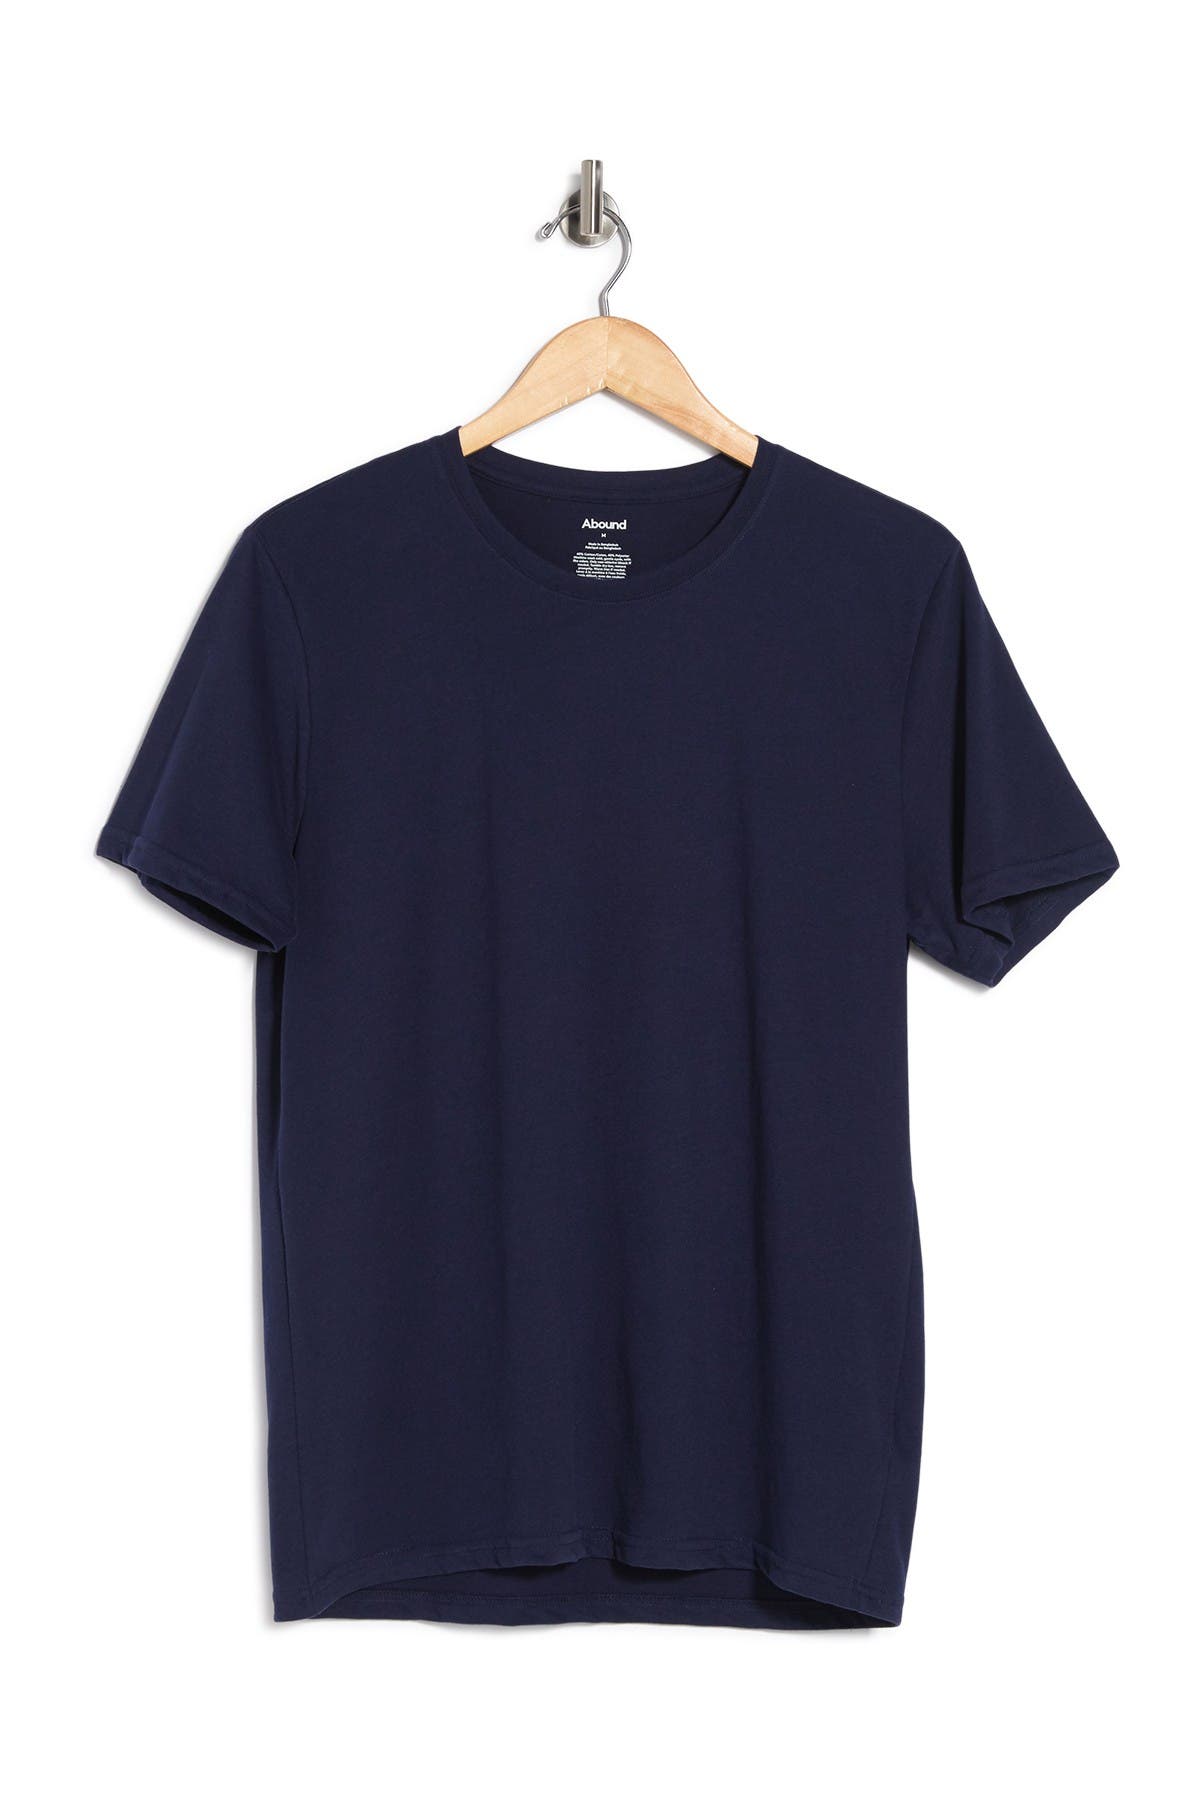 Abound Short Sleeve Crewneck T-shirt In Navy Peacoat